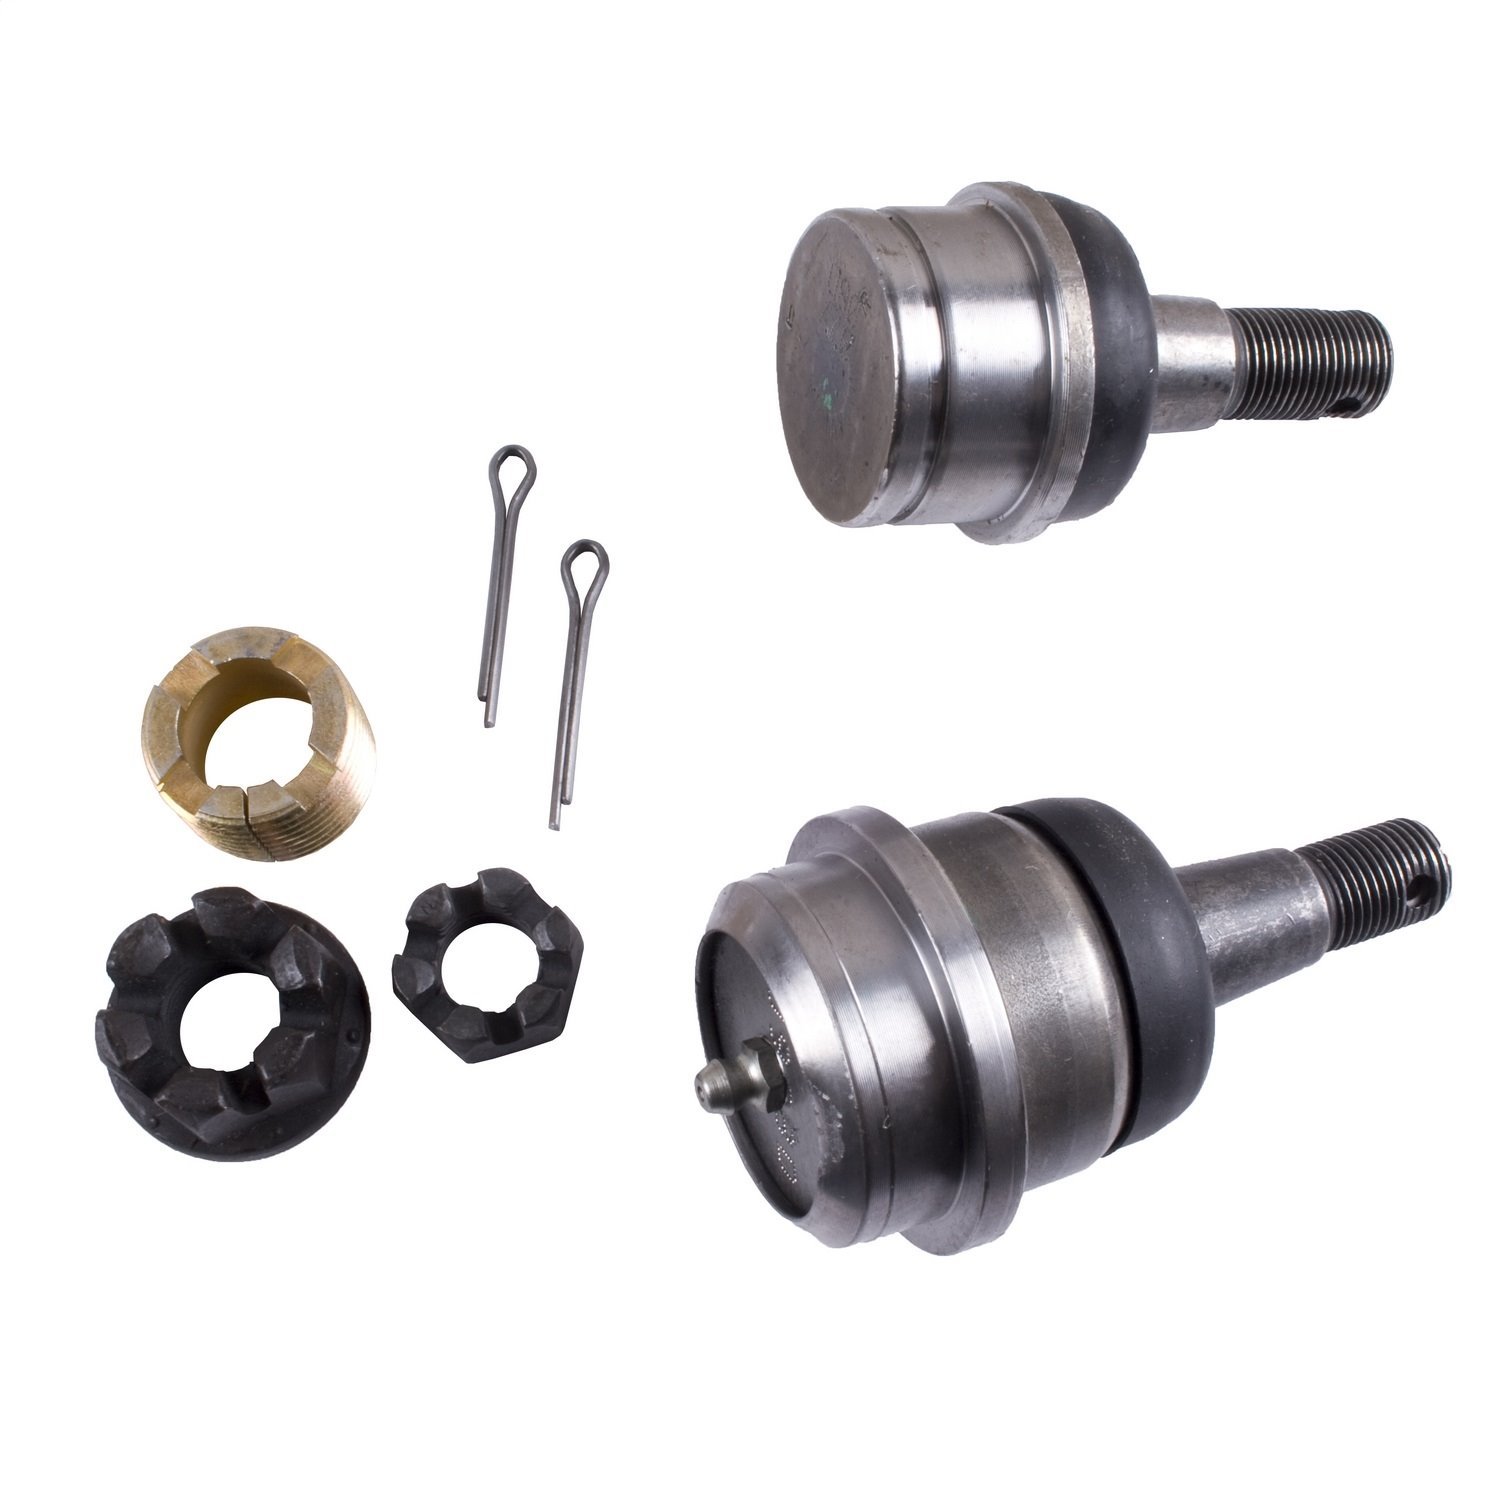 This upper and lower Ball Joint kit from Spicer fits 87-95 Jeep Wrangler YJ and 97-06 Jeep TJ/LJ Wra